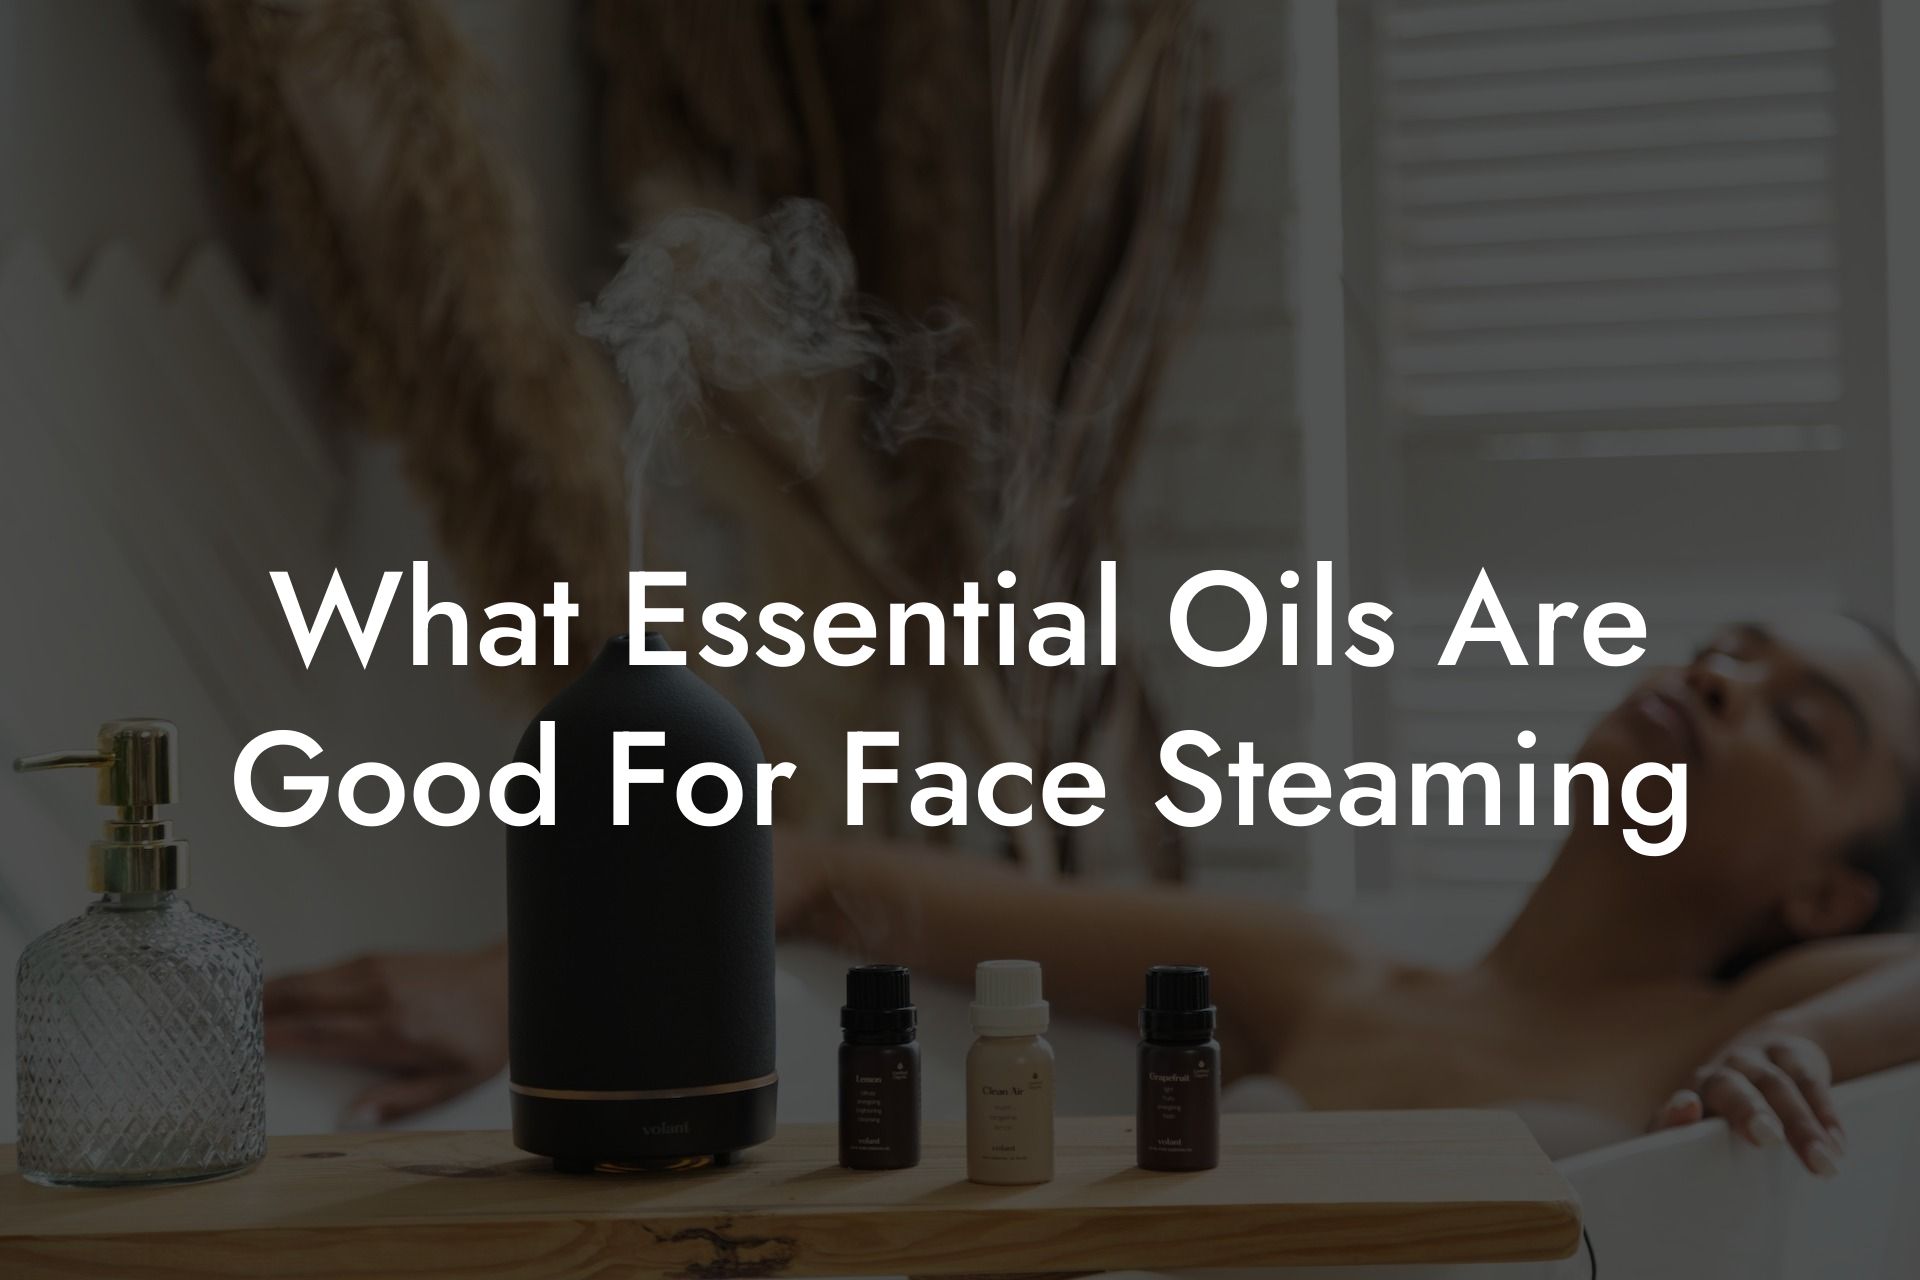 What Essential Oils Are Good For Face Steaming